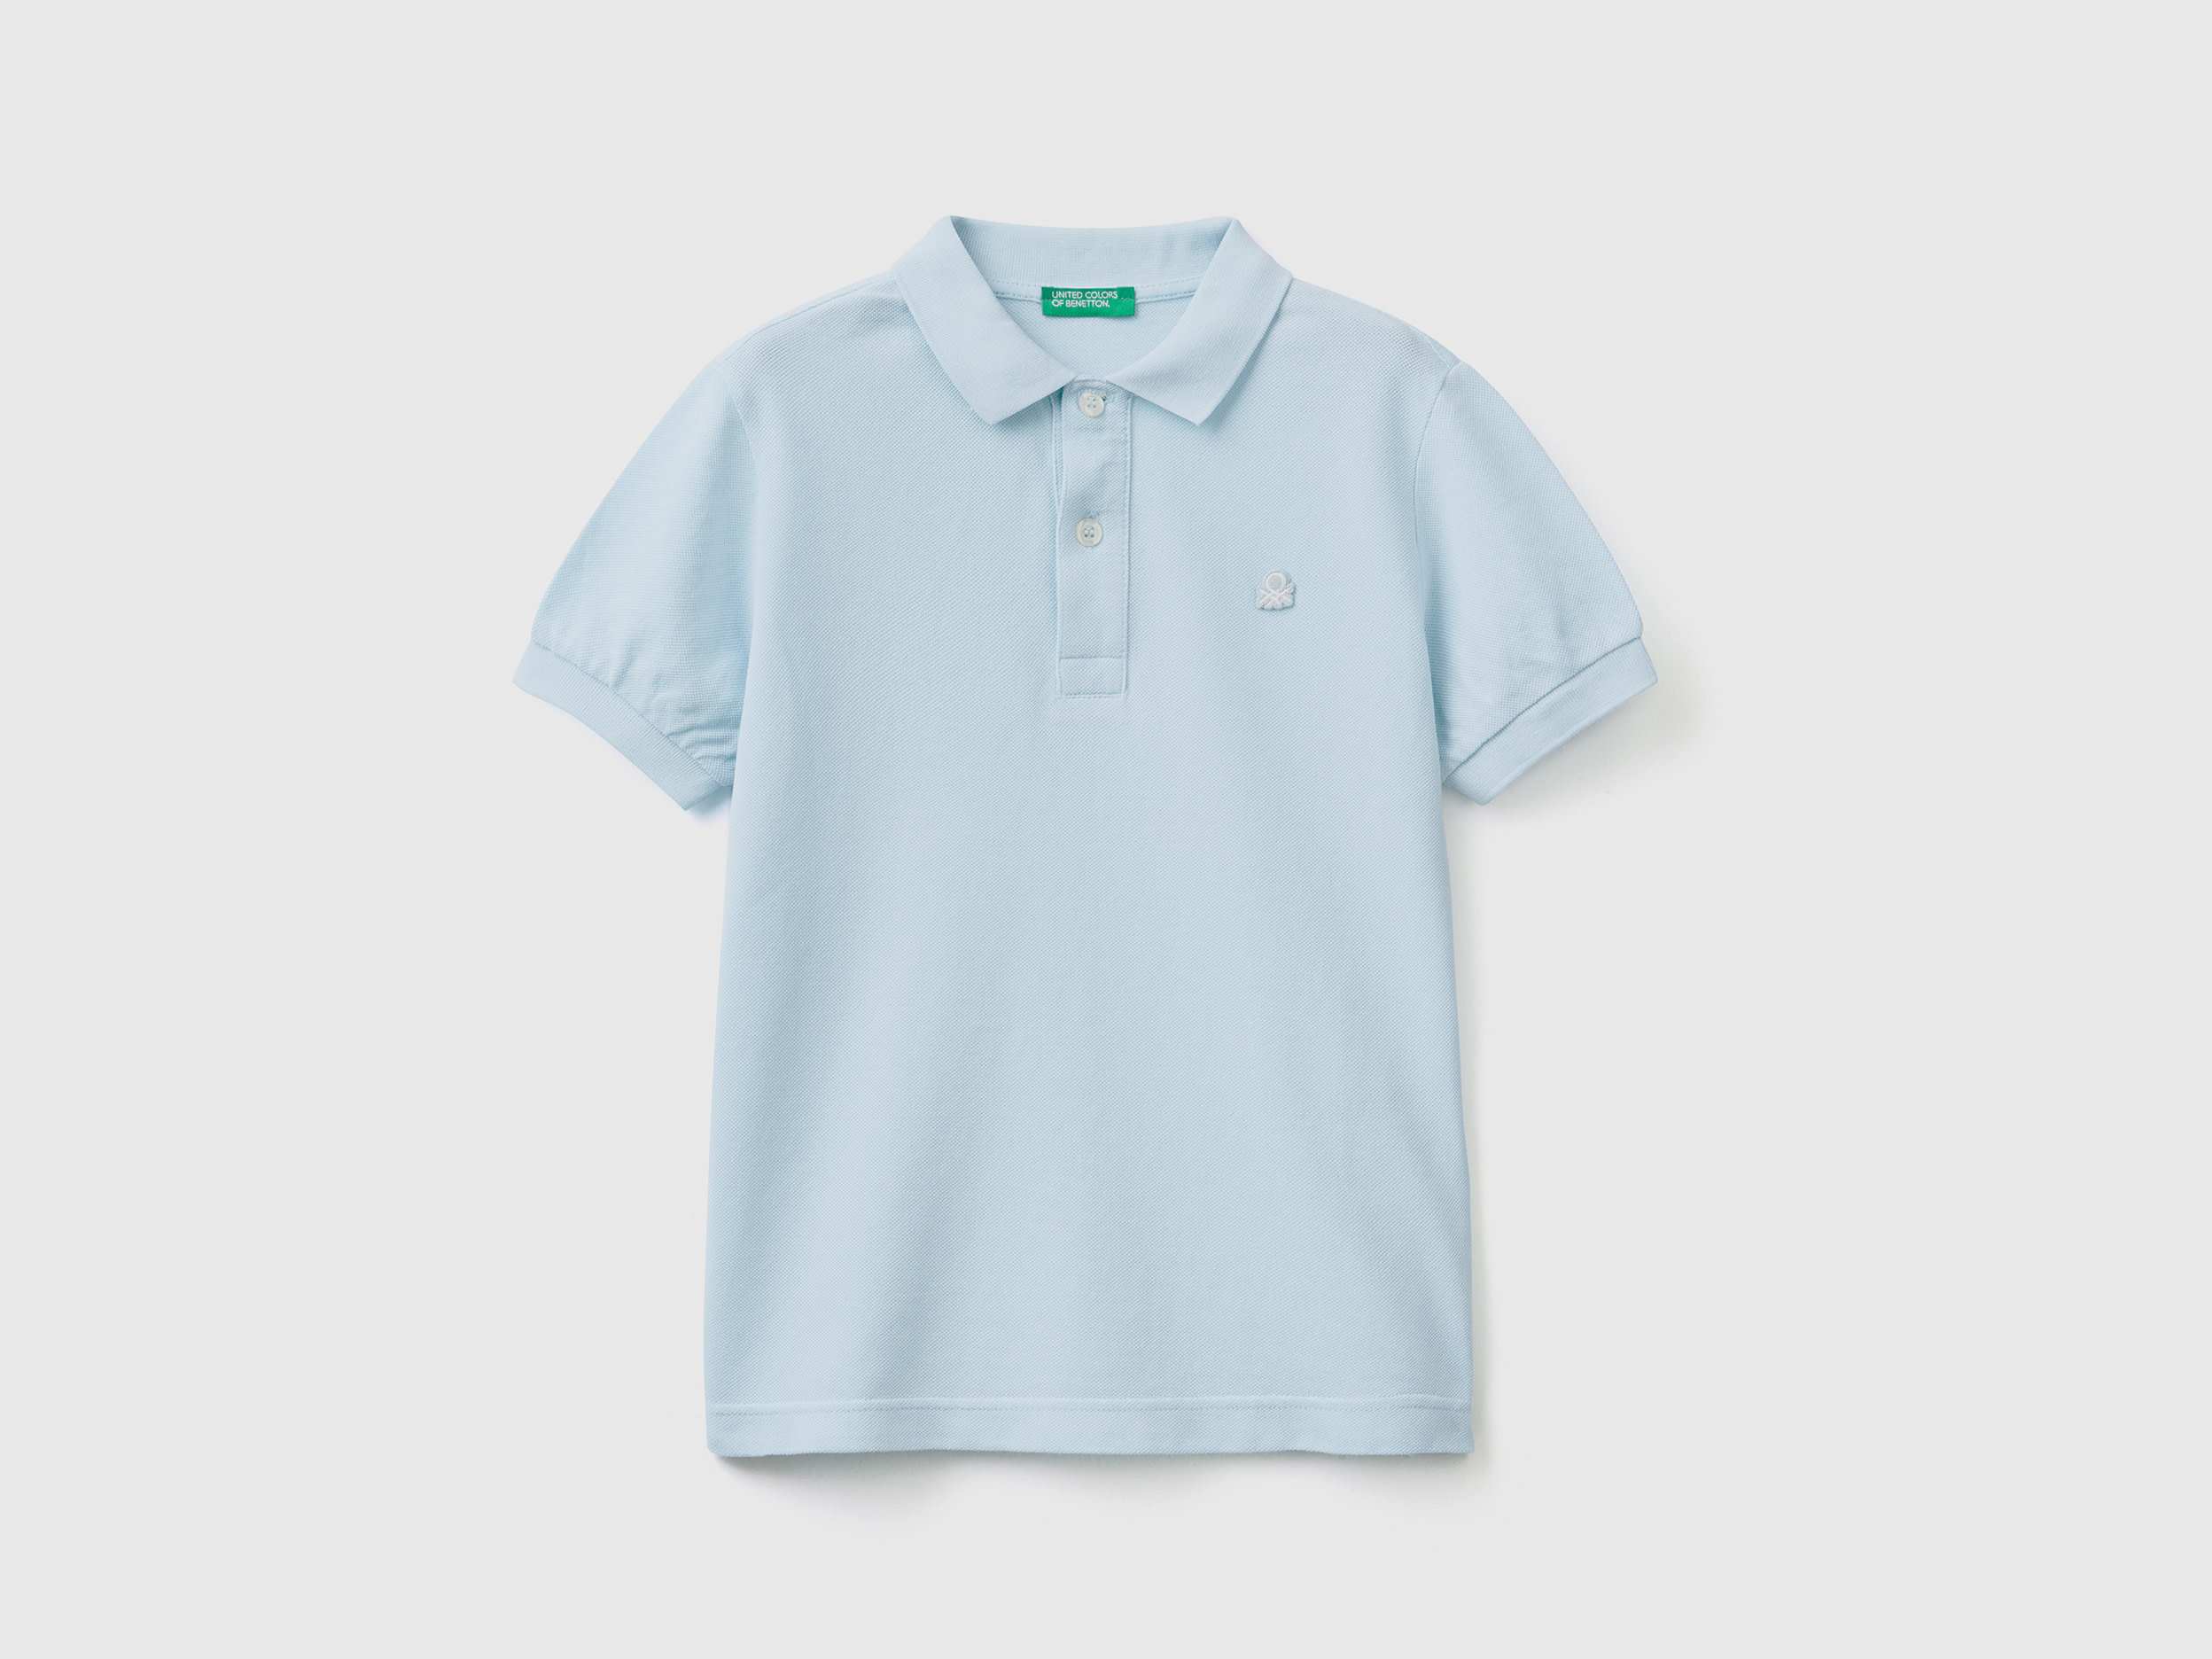 Image of Benetton, Slim Fit Polo In 100% Organic Cotton, size XL, Sky Blue, Kids